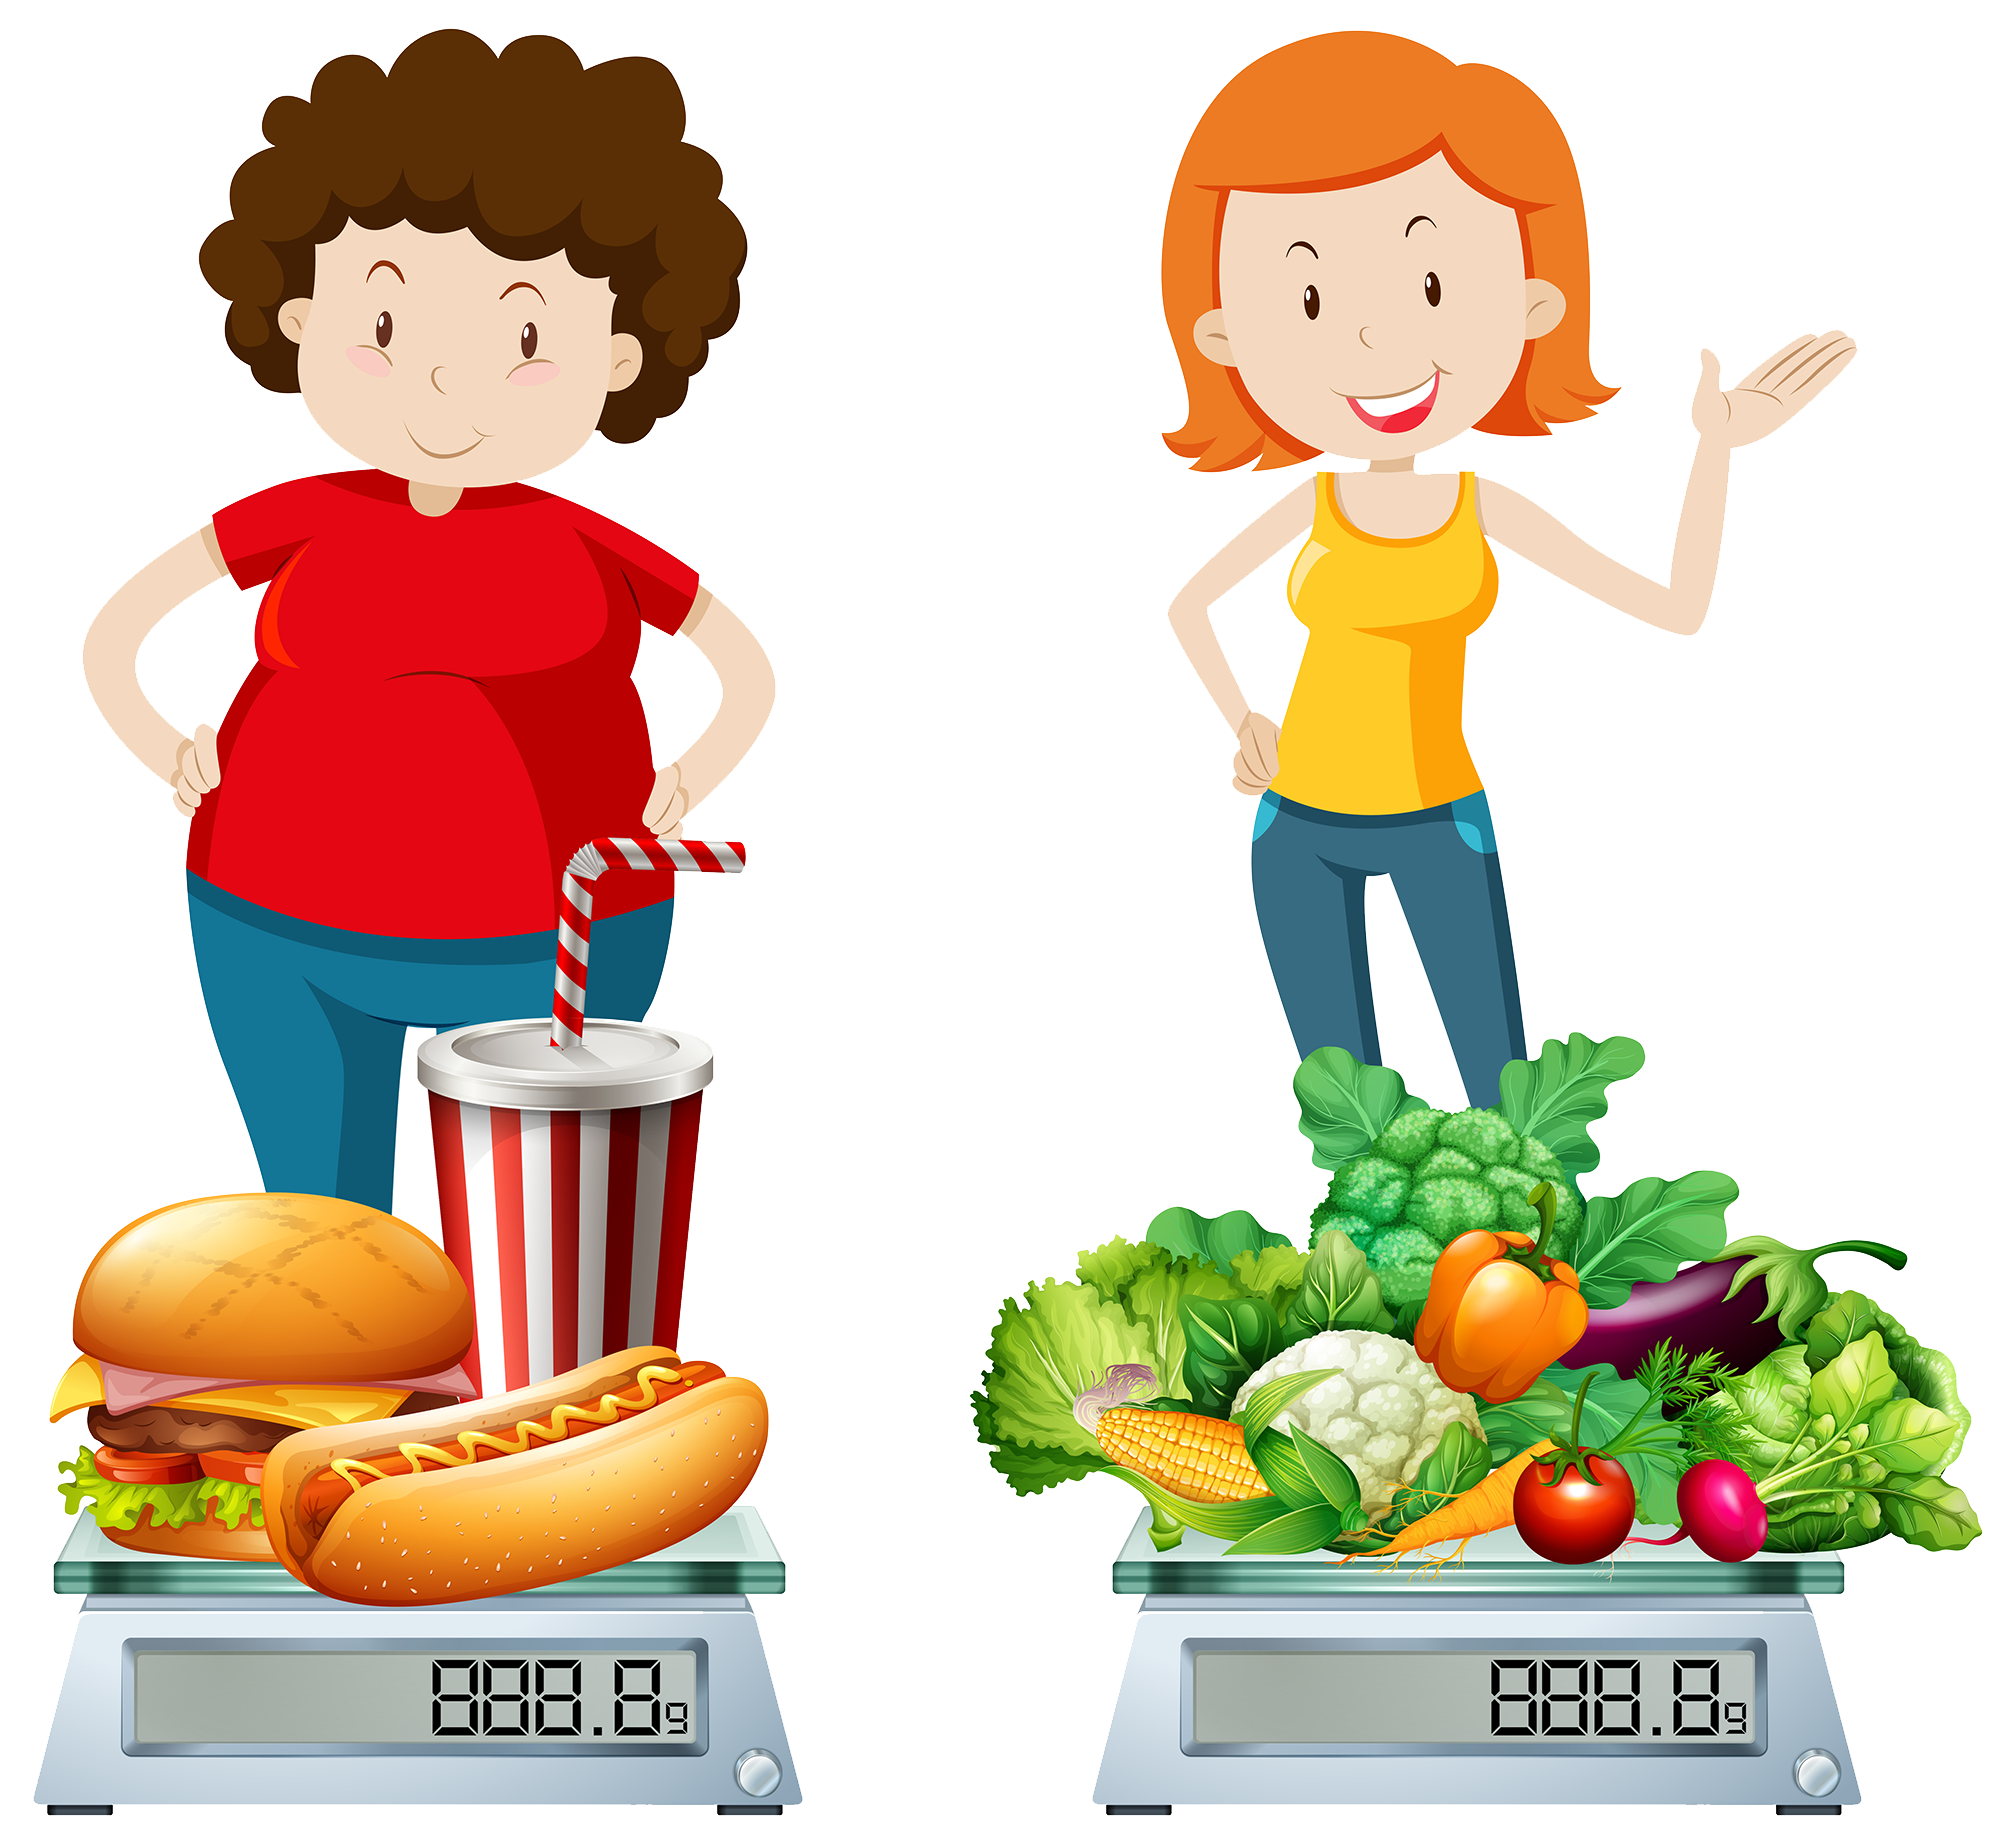 Sharing clipart food, Sharing food Transparent FREE for.